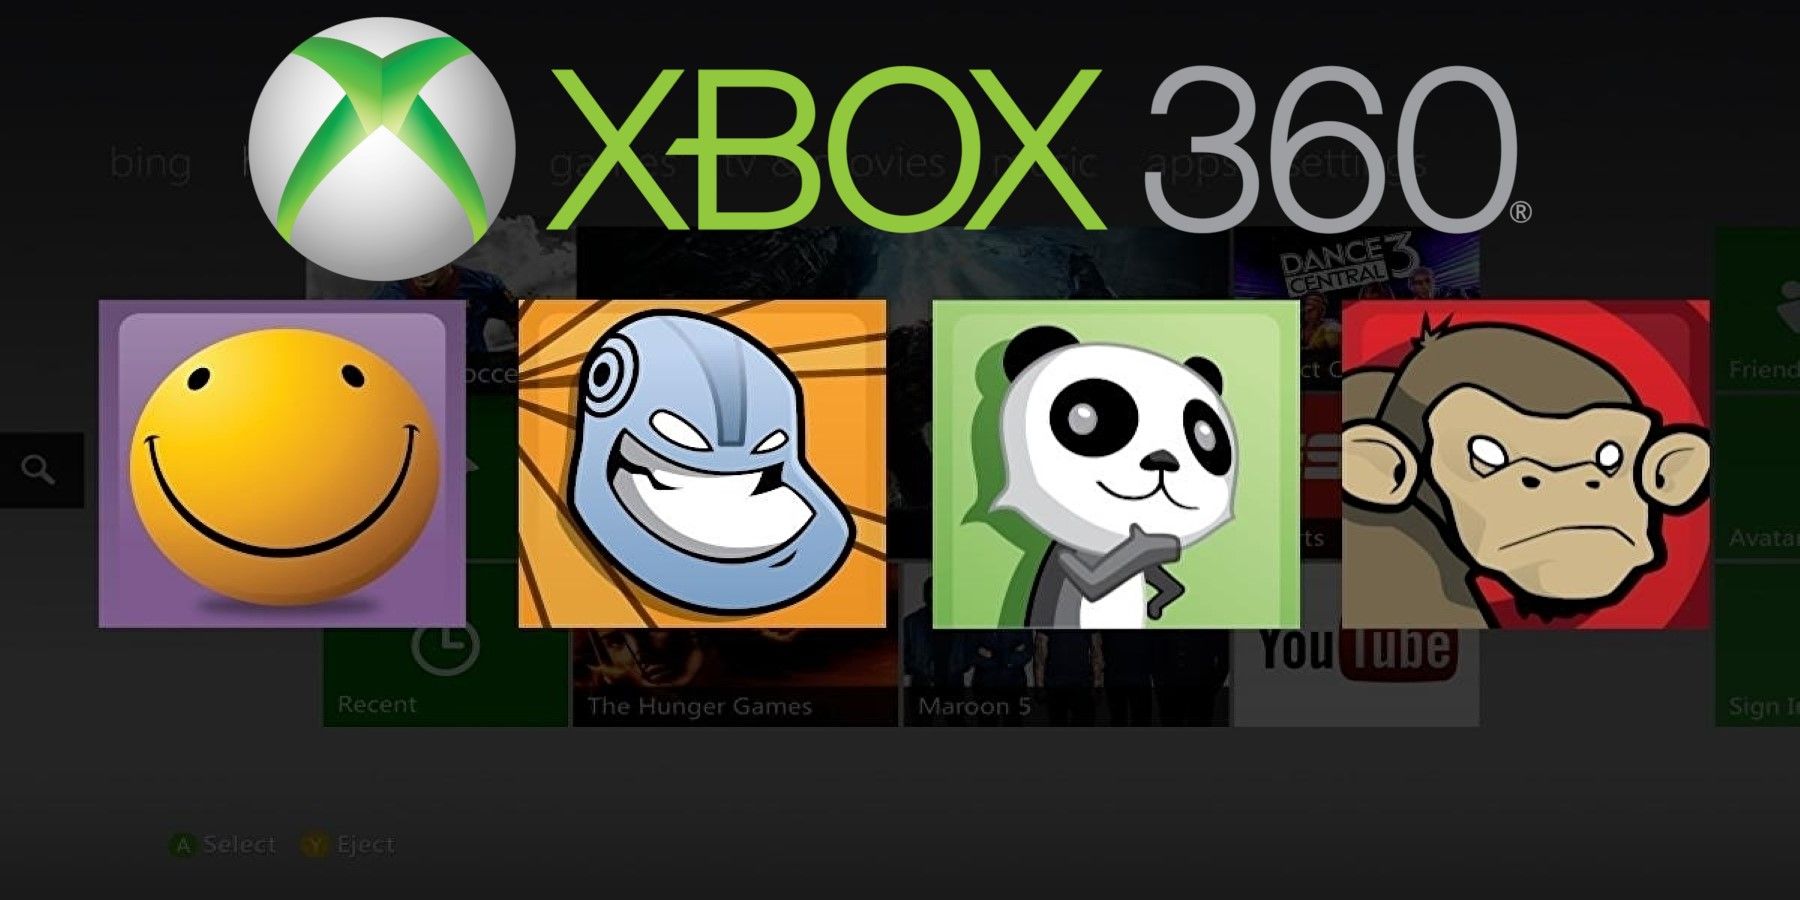 Xbox Update Will Make Classic 360 Gamerpics Look Better on New Consoles